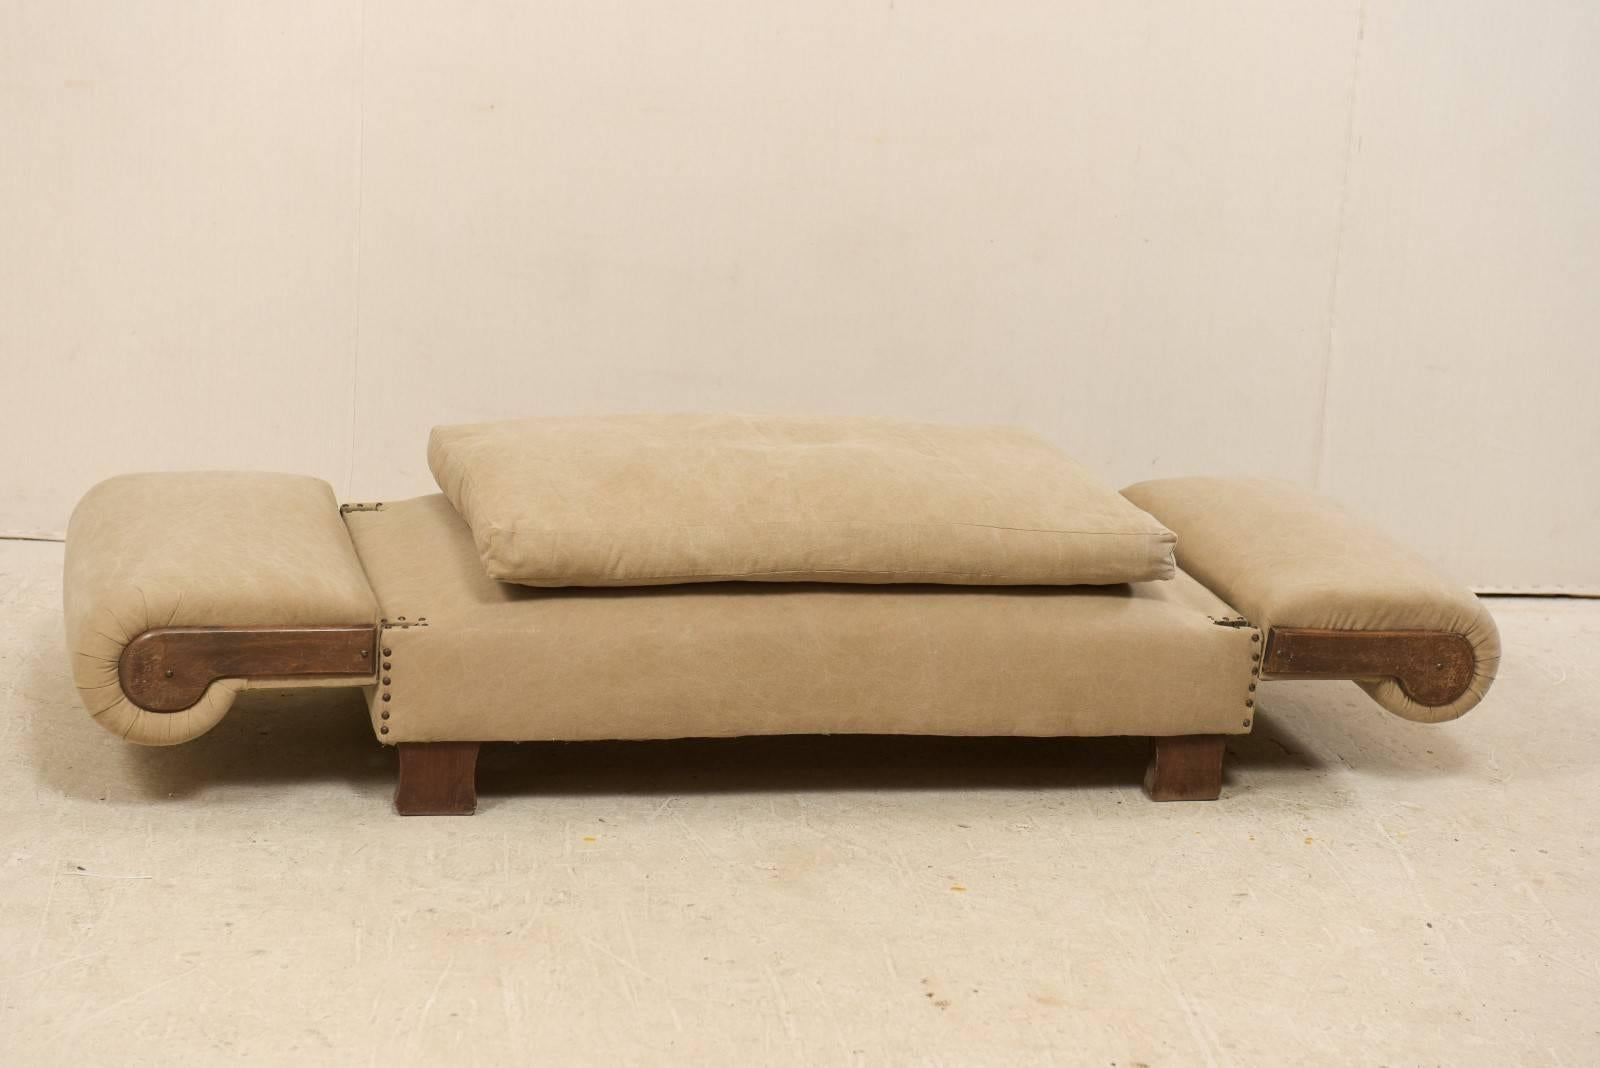 20th Century French Lit De Jour ‘Daybed’ circa 1920s-1930s with Nice Rounded Arms For Sale